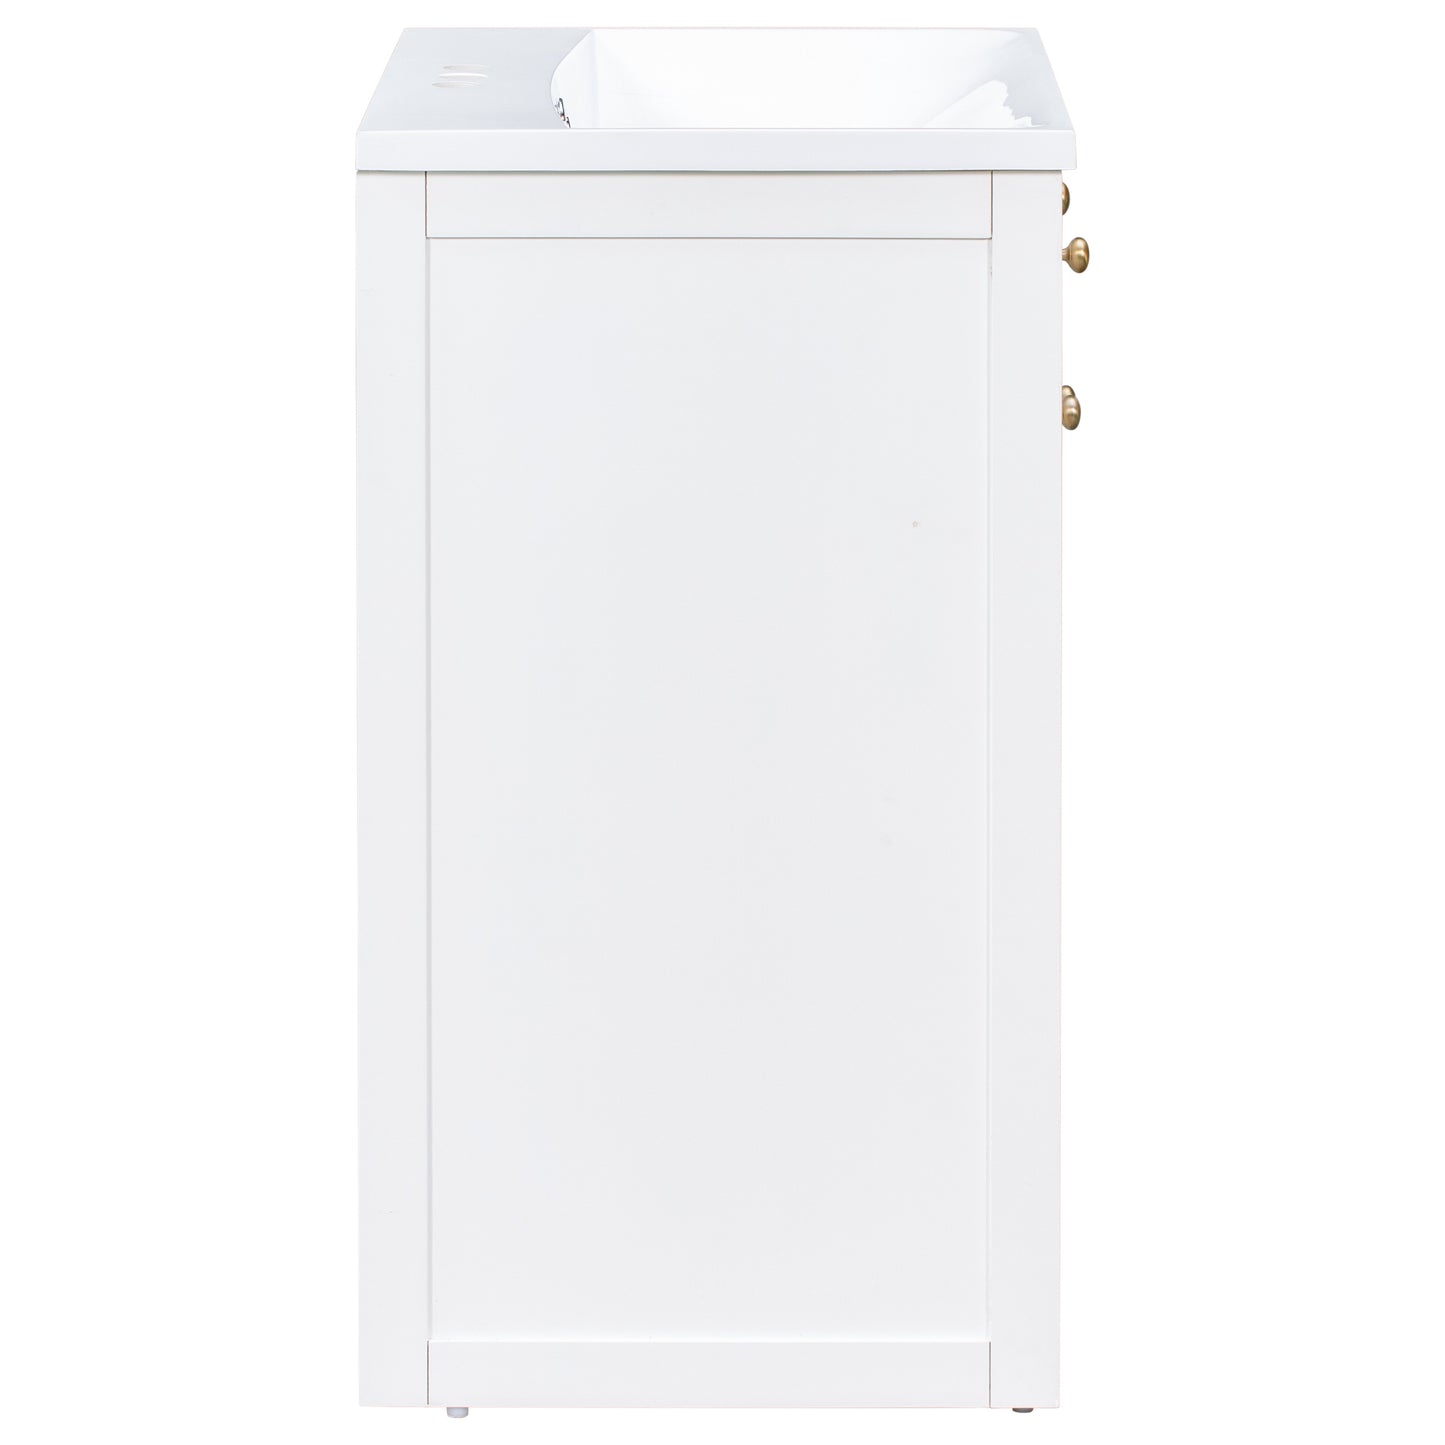 24" Bathroom vanity with Single Sink，White Combo Cabinet Undermount Sink，Bathroom Storage Cabinet，Solid Wood Frame，Pull-out footrest